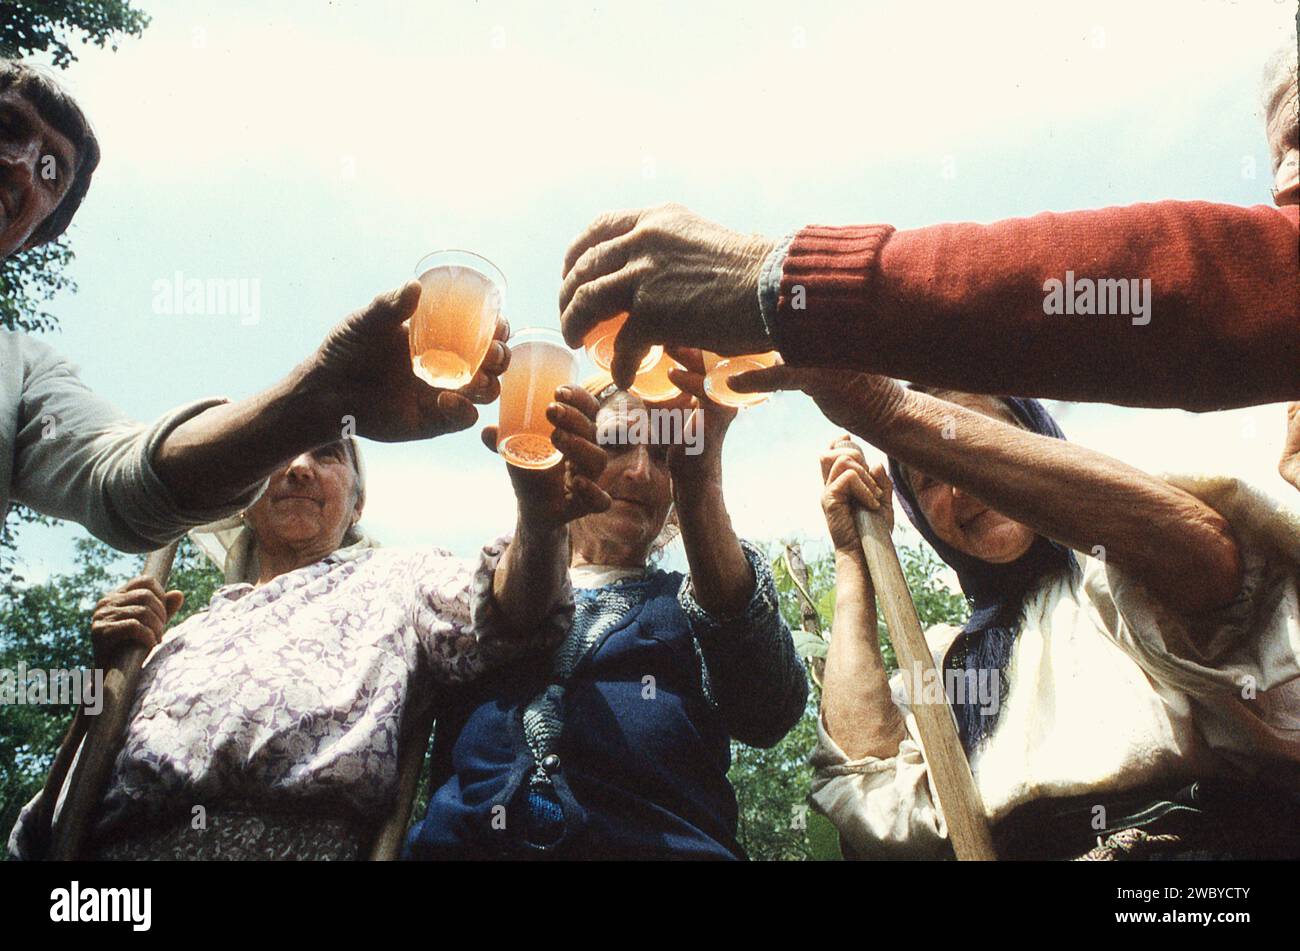 Vrancea County, Romania, approx. 1995. Group of peasants having a glass of homemade wine in a short break from their field work. Stock Photo